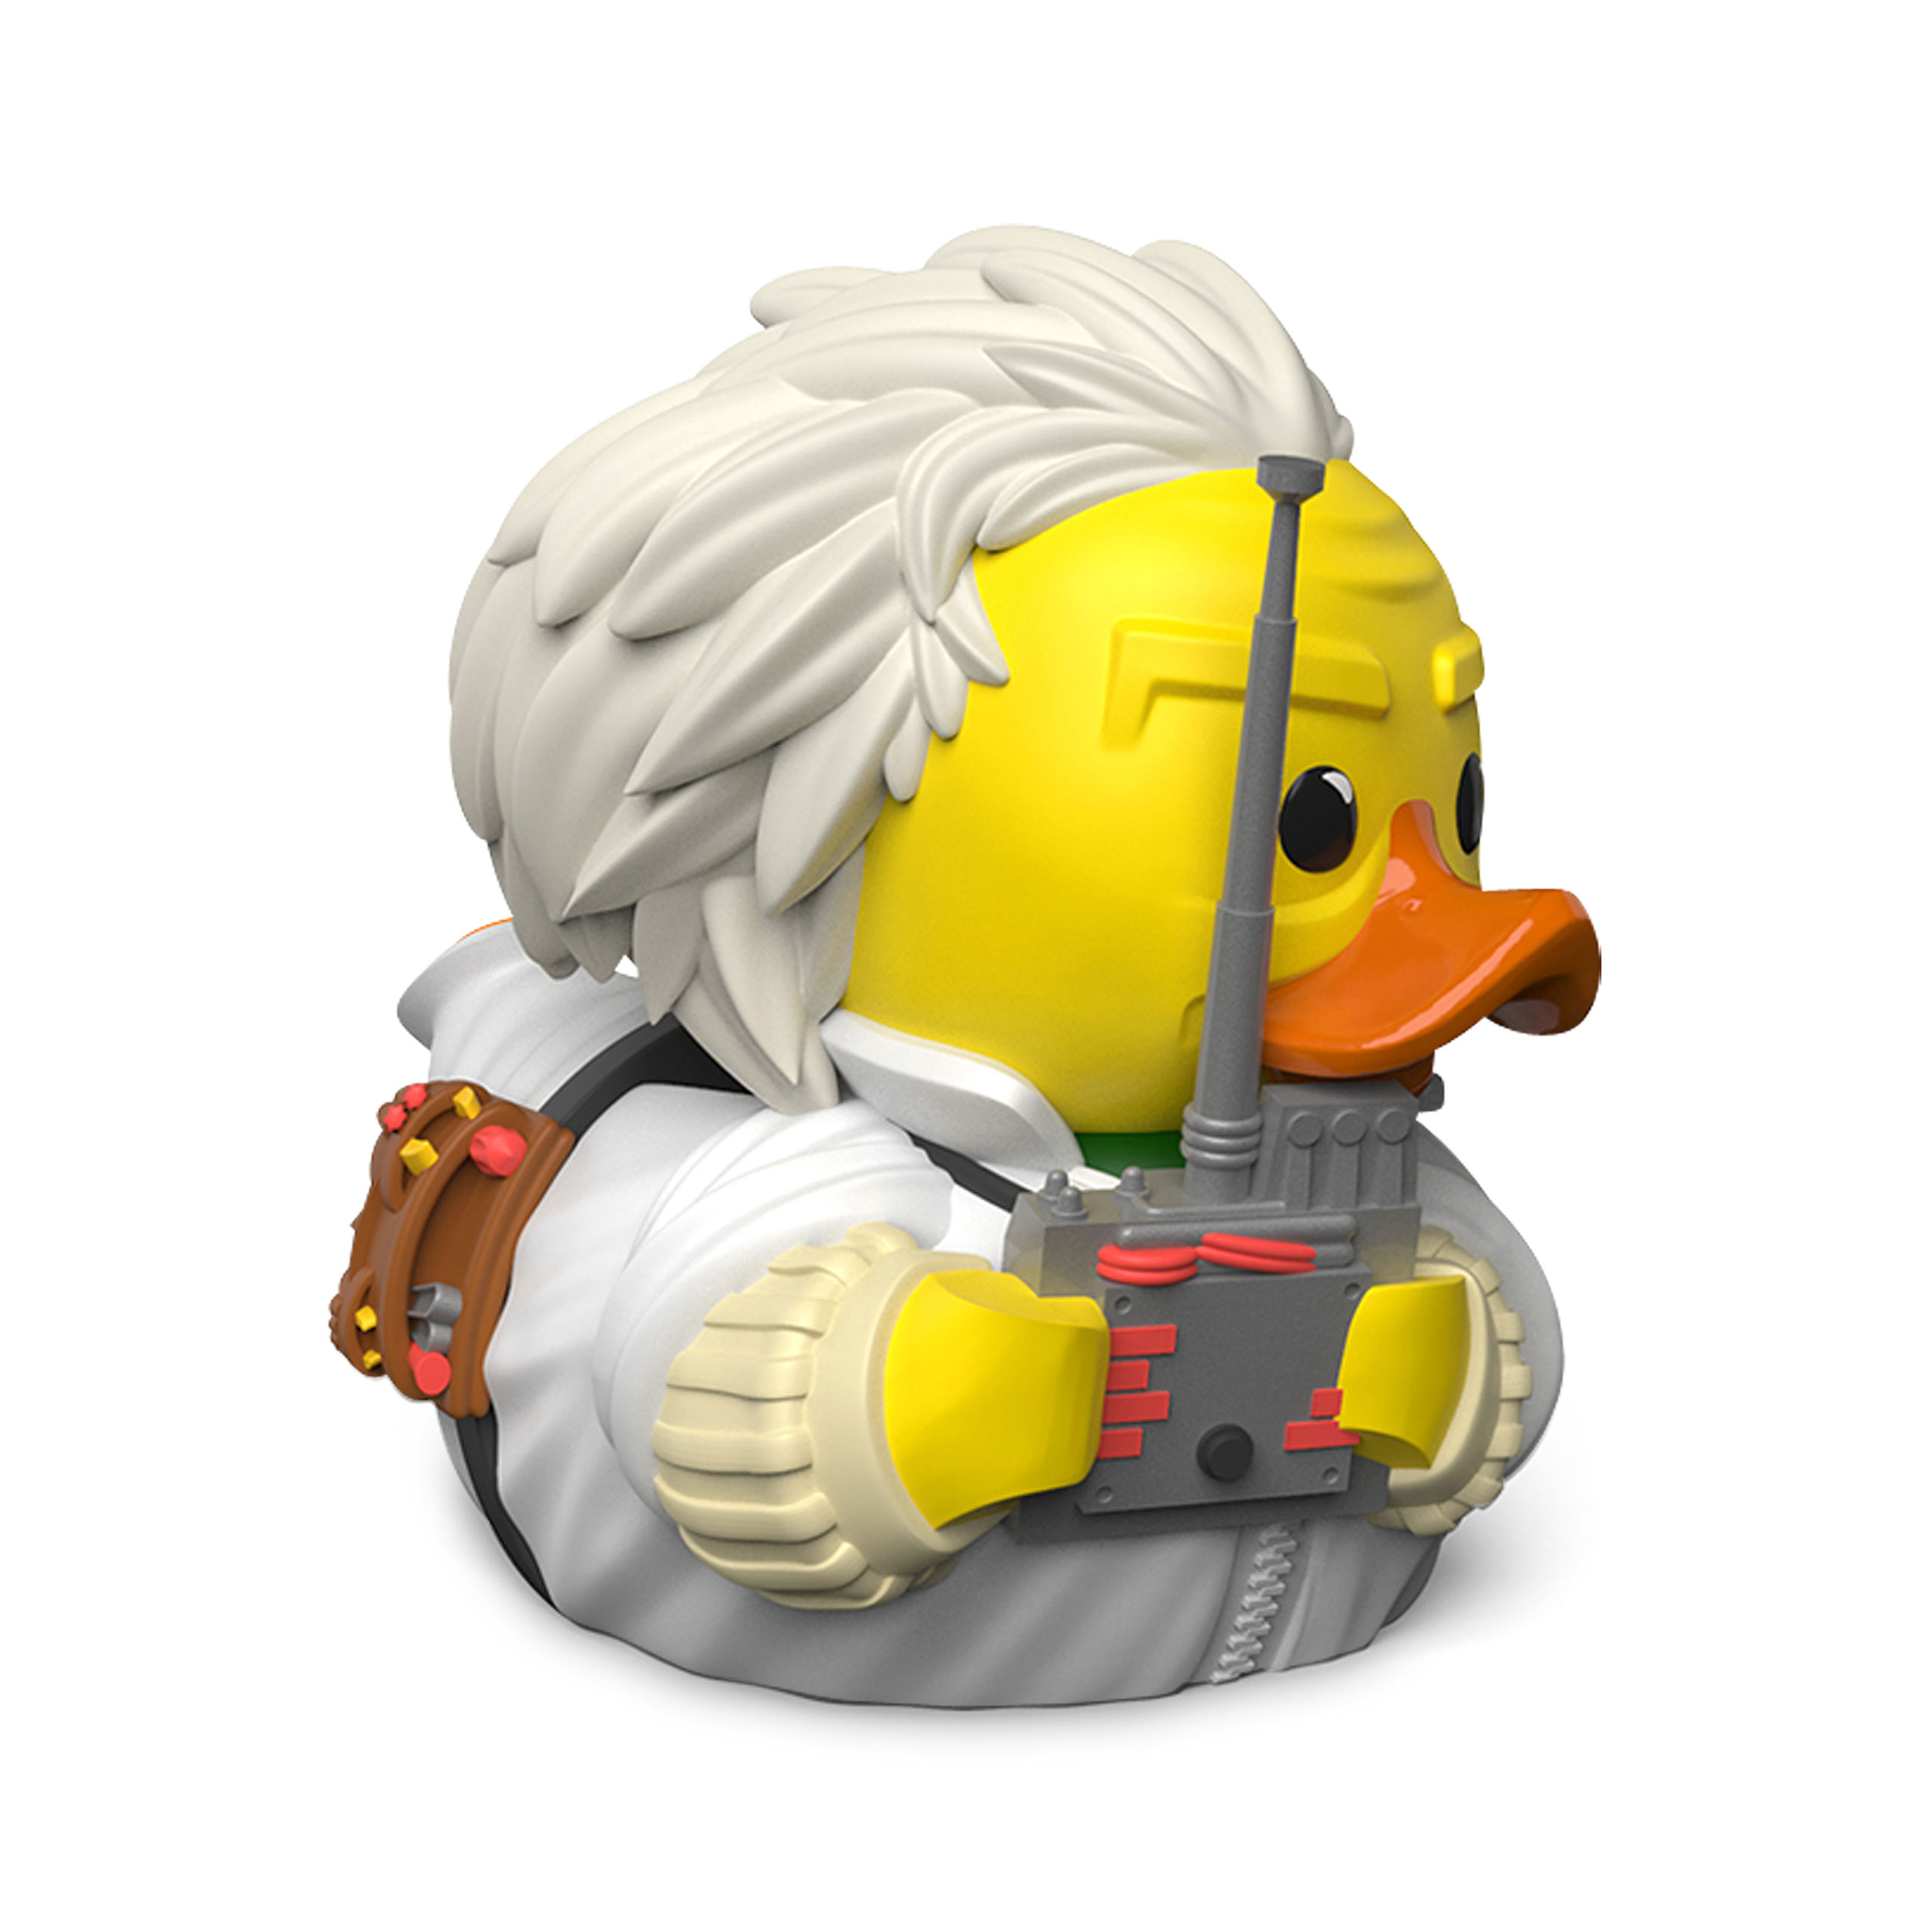 Back to the Future - Doc Brown TUBBZ Deco Duck